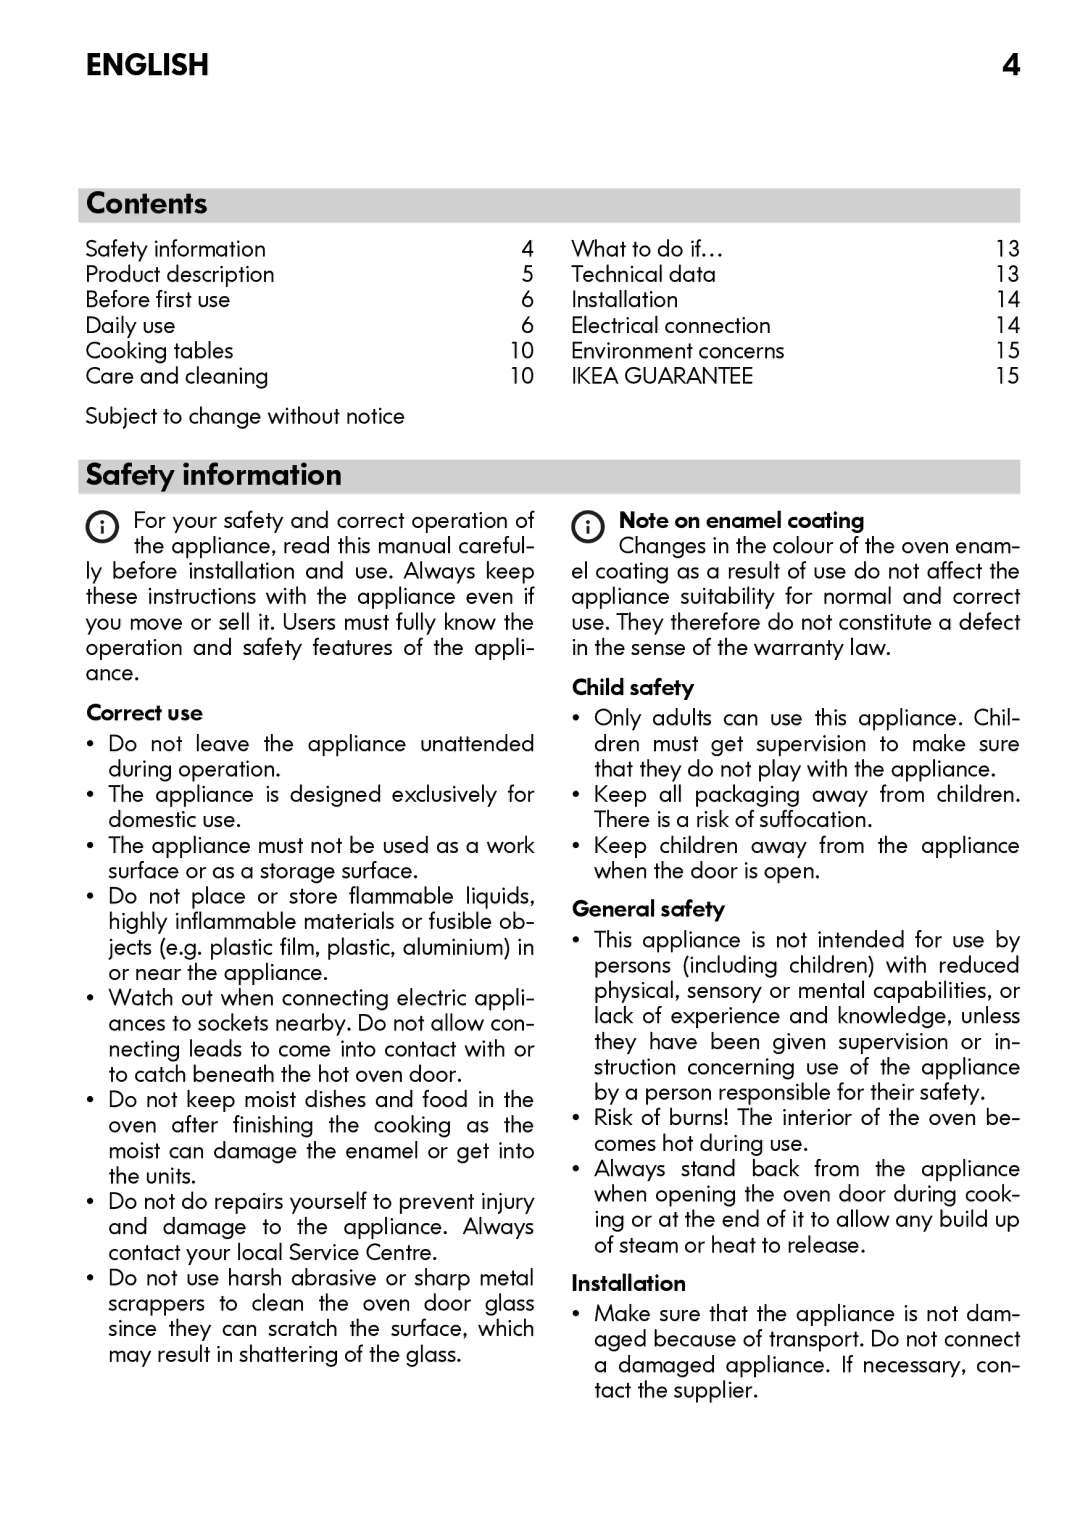 IKEA OV9 manual Contents, Safety information 